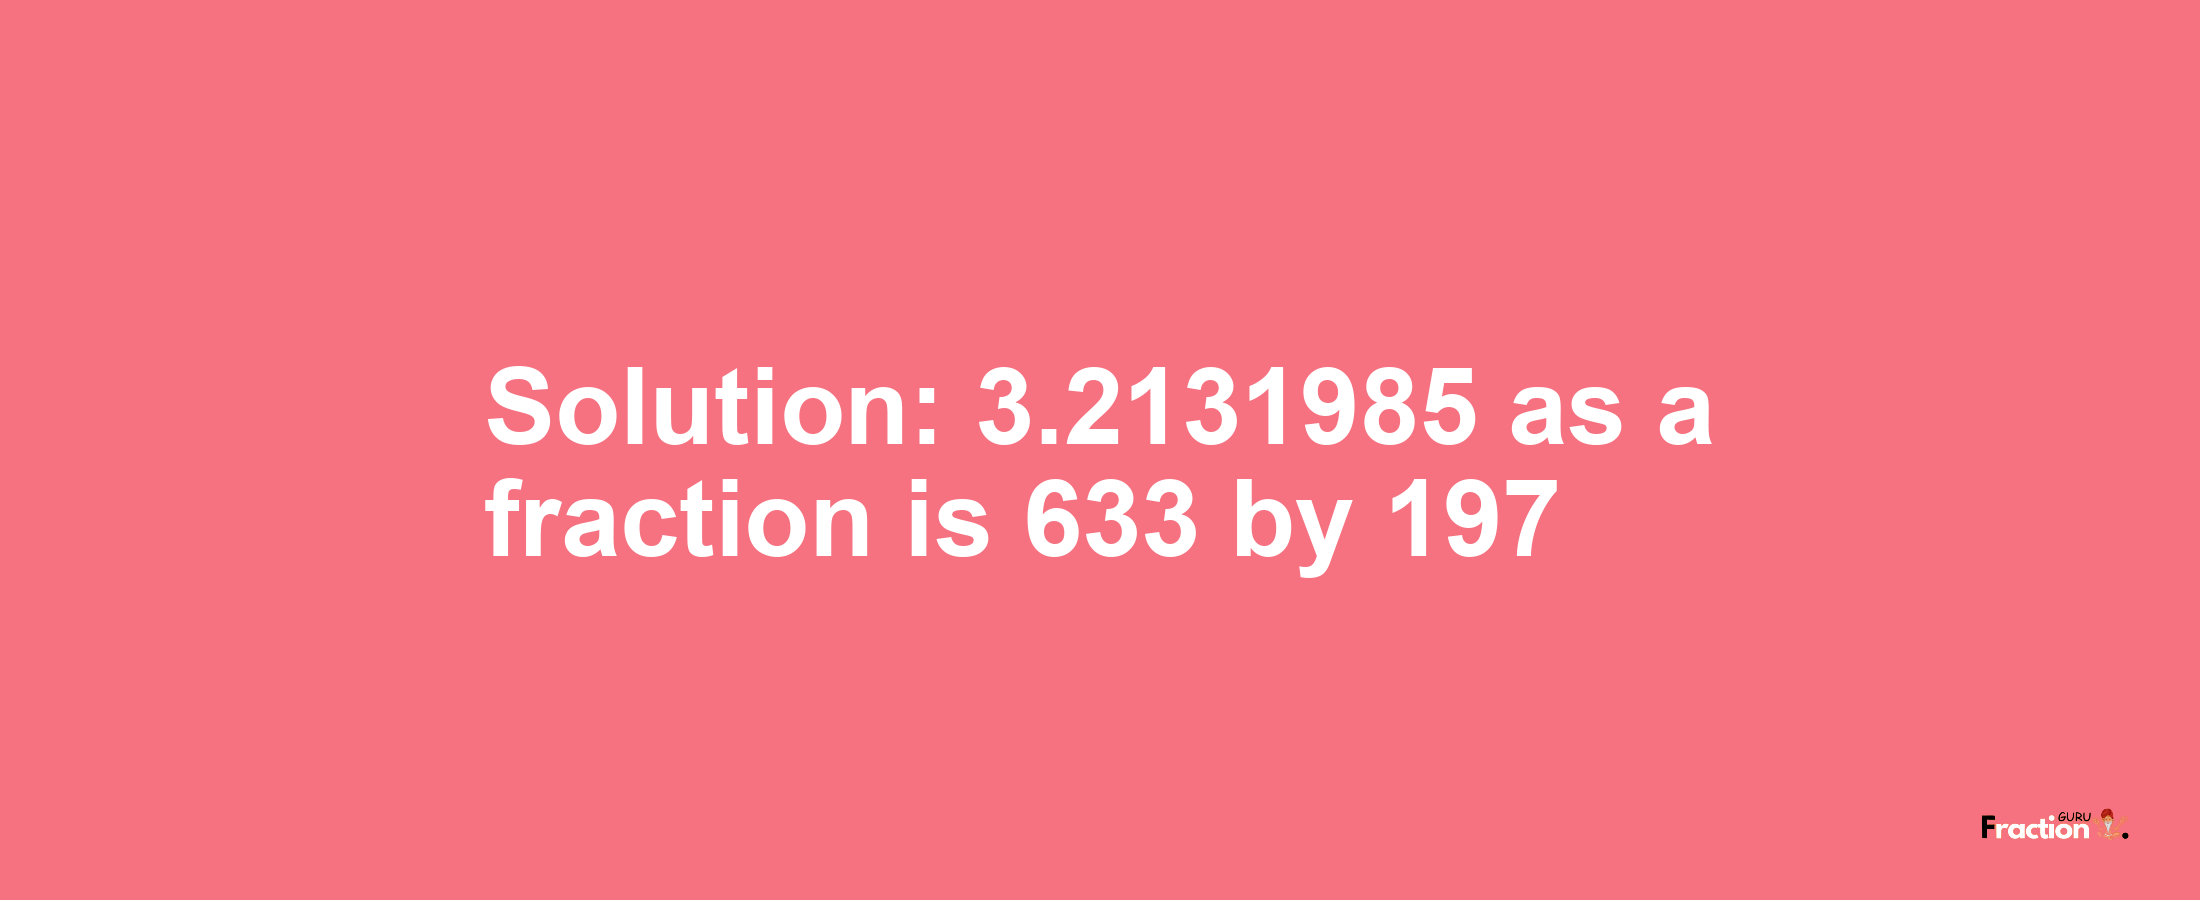 Solution:3.2131985 as a fraction is 633/197